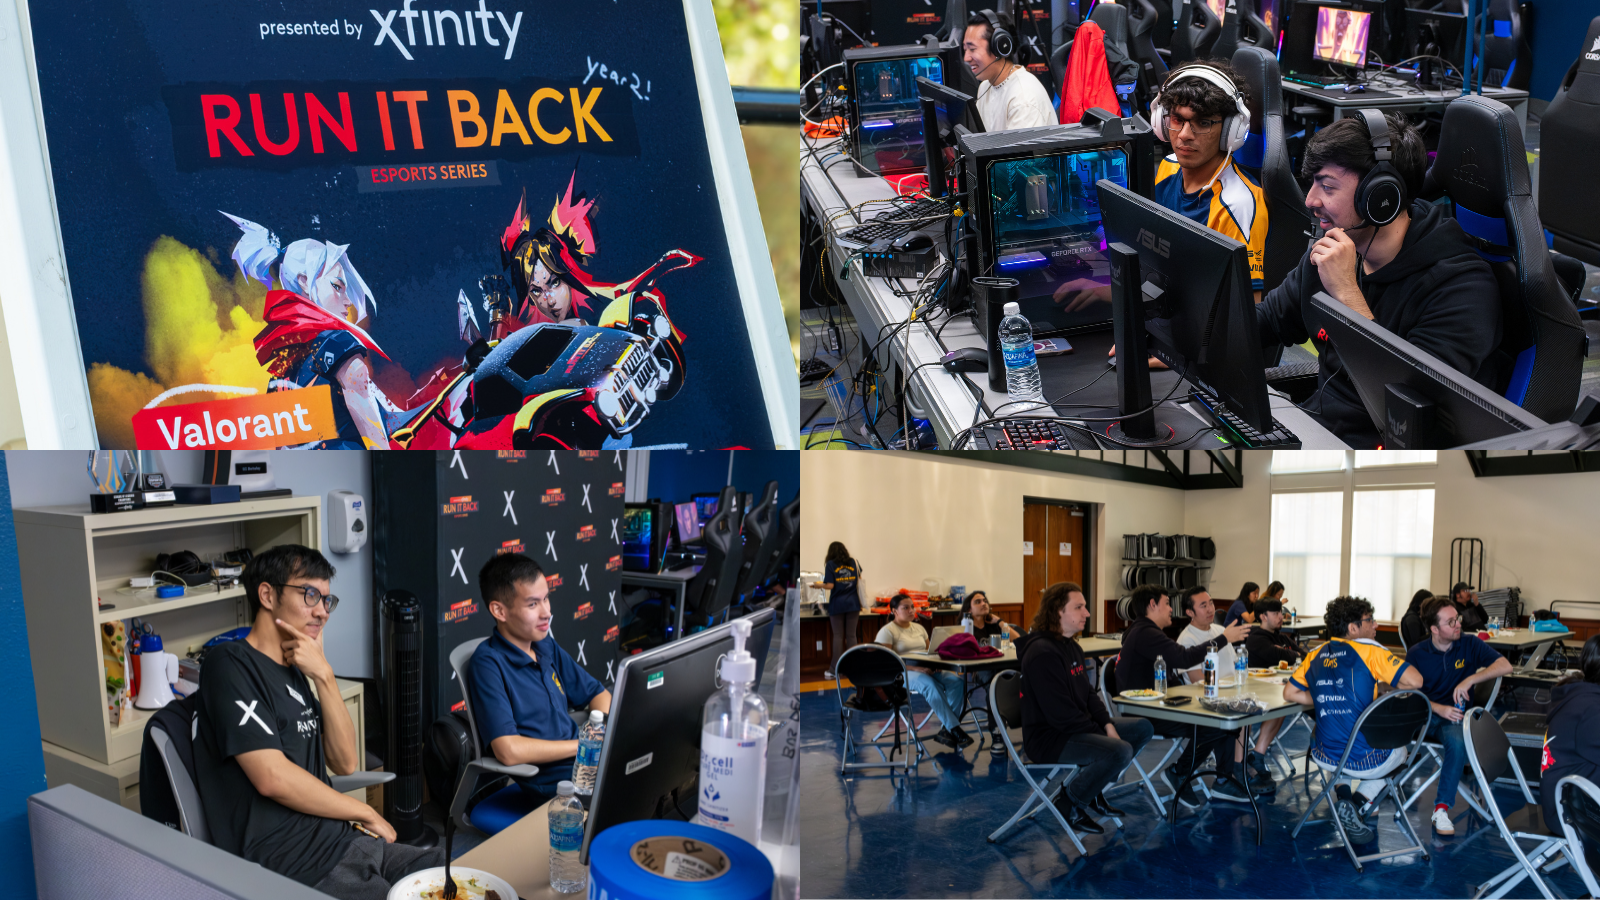 Xfinity Runs It Back for a 2nd Year with Collegiate Esports Teams